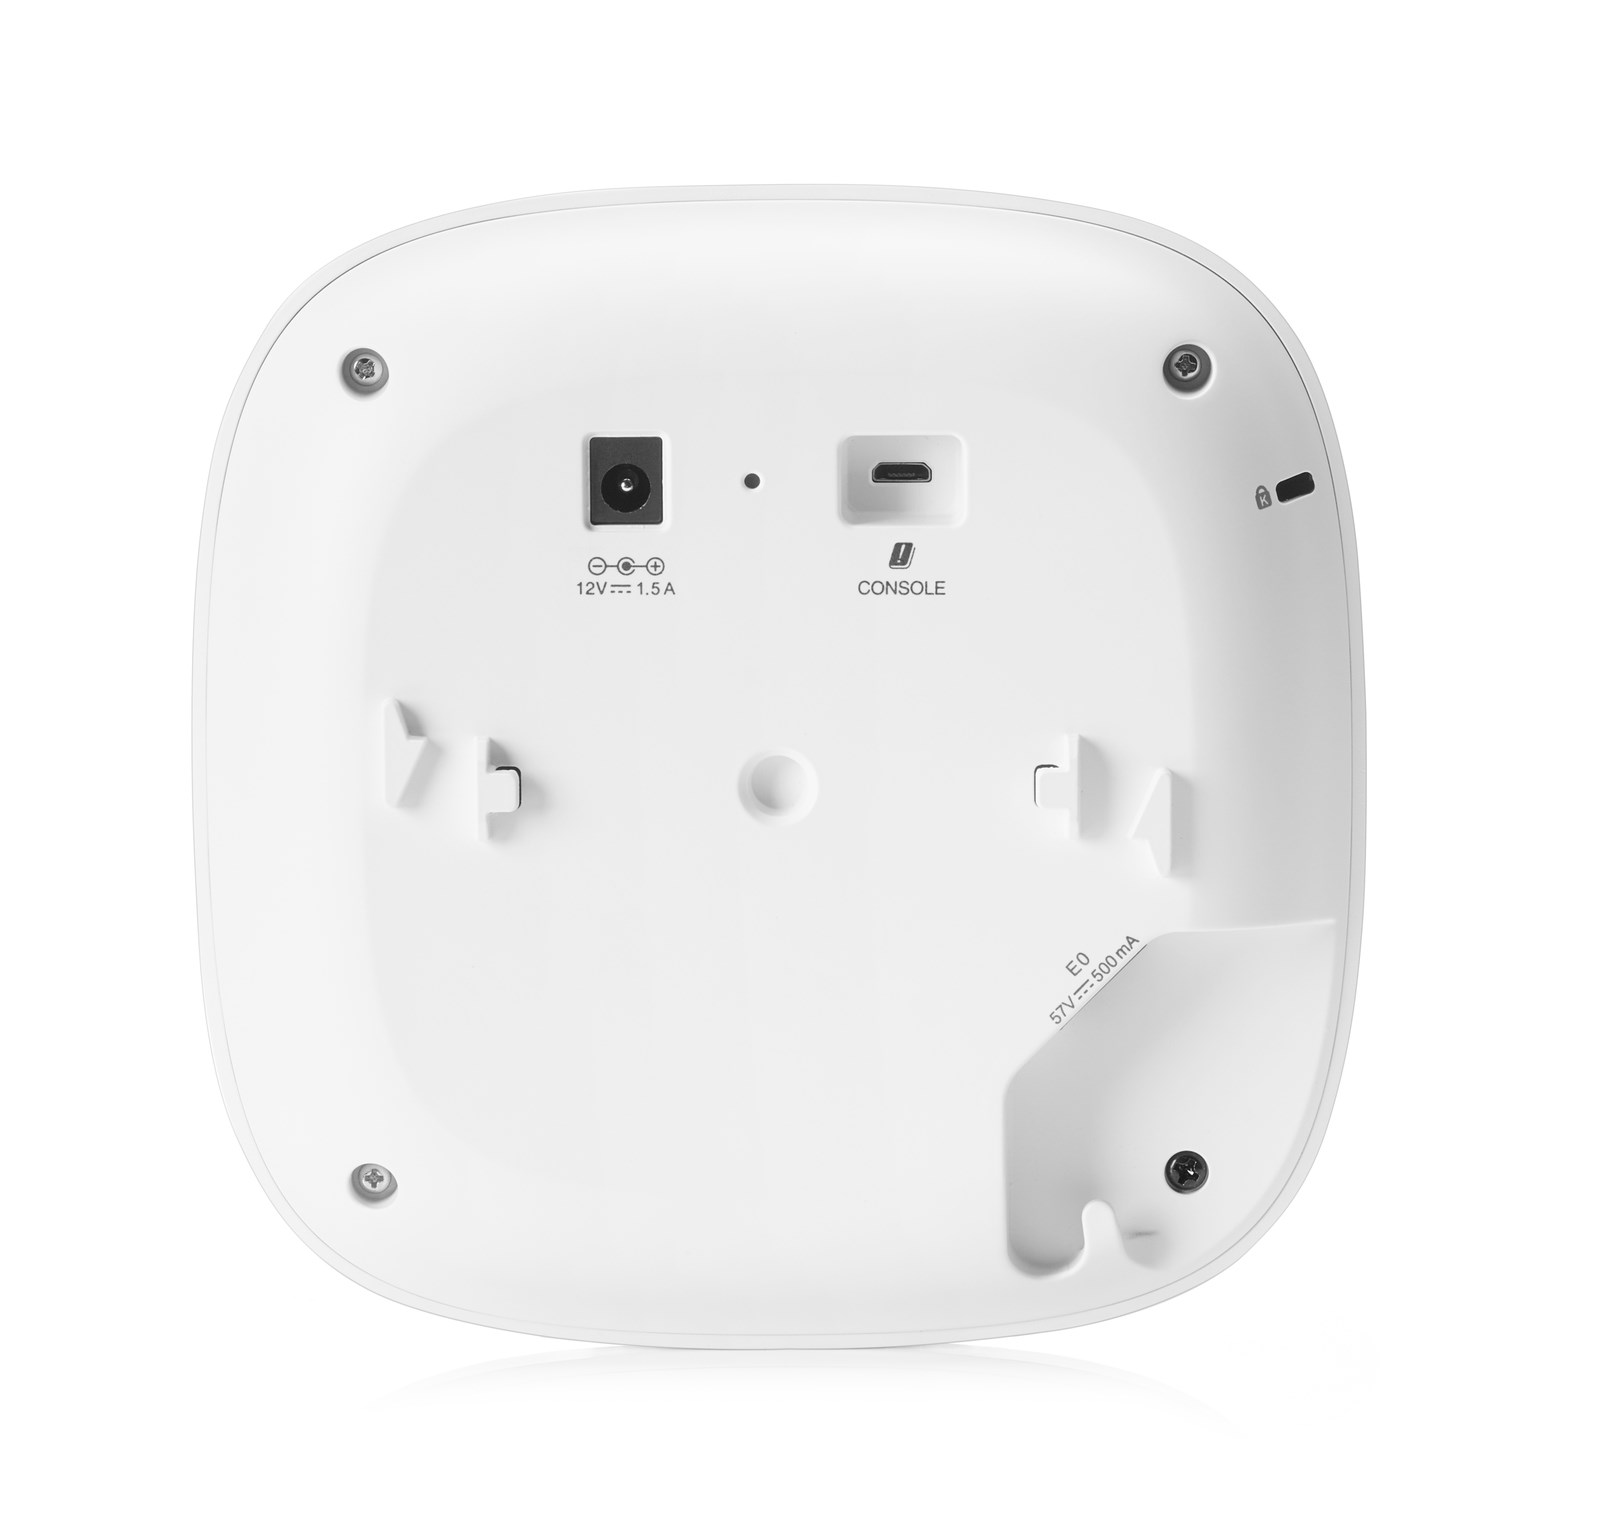 HPE Networking Instant On AP27 (RW) Dual Radio 2x2 Wi-Fi 6 Outdoor Access Point (Powered with a PoE injector)1 